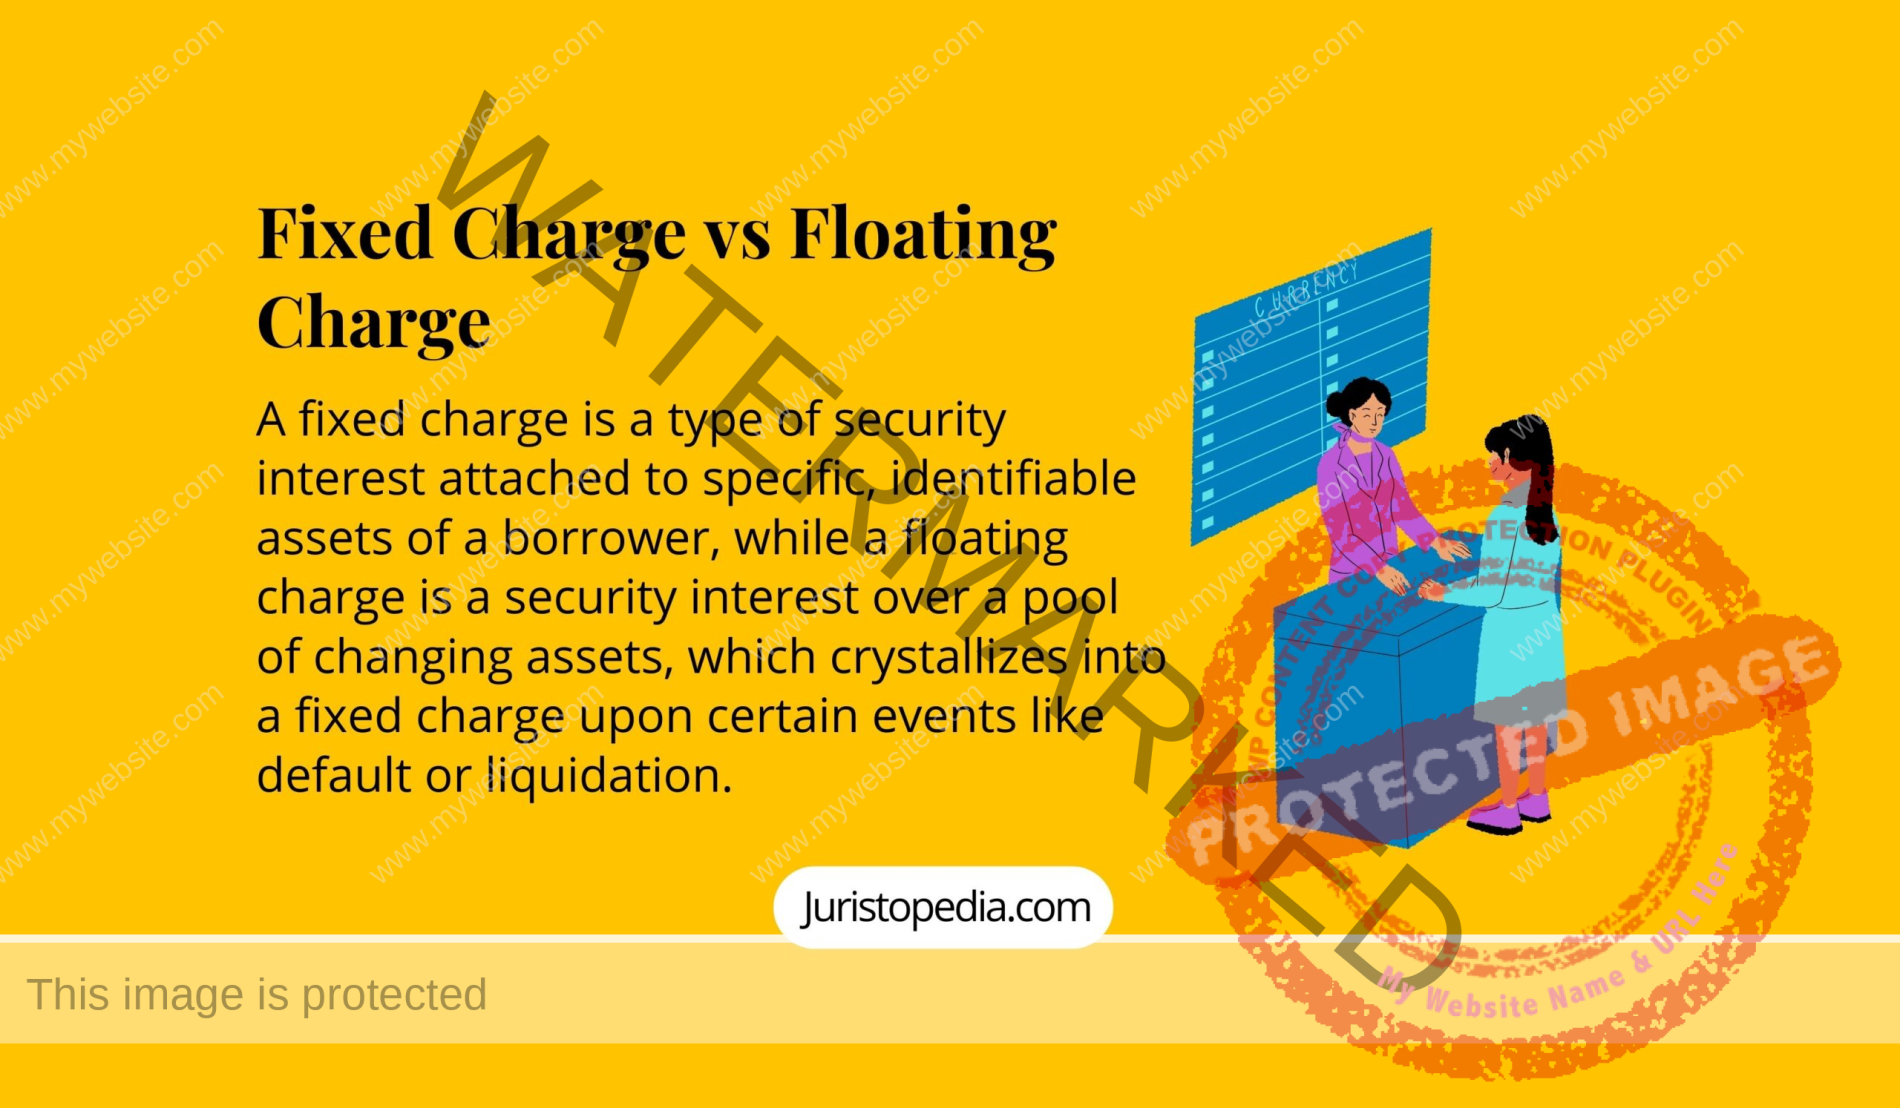 Fixed Charge vs Floating Charge - debenture loan - fixed and floating charge - floating lien